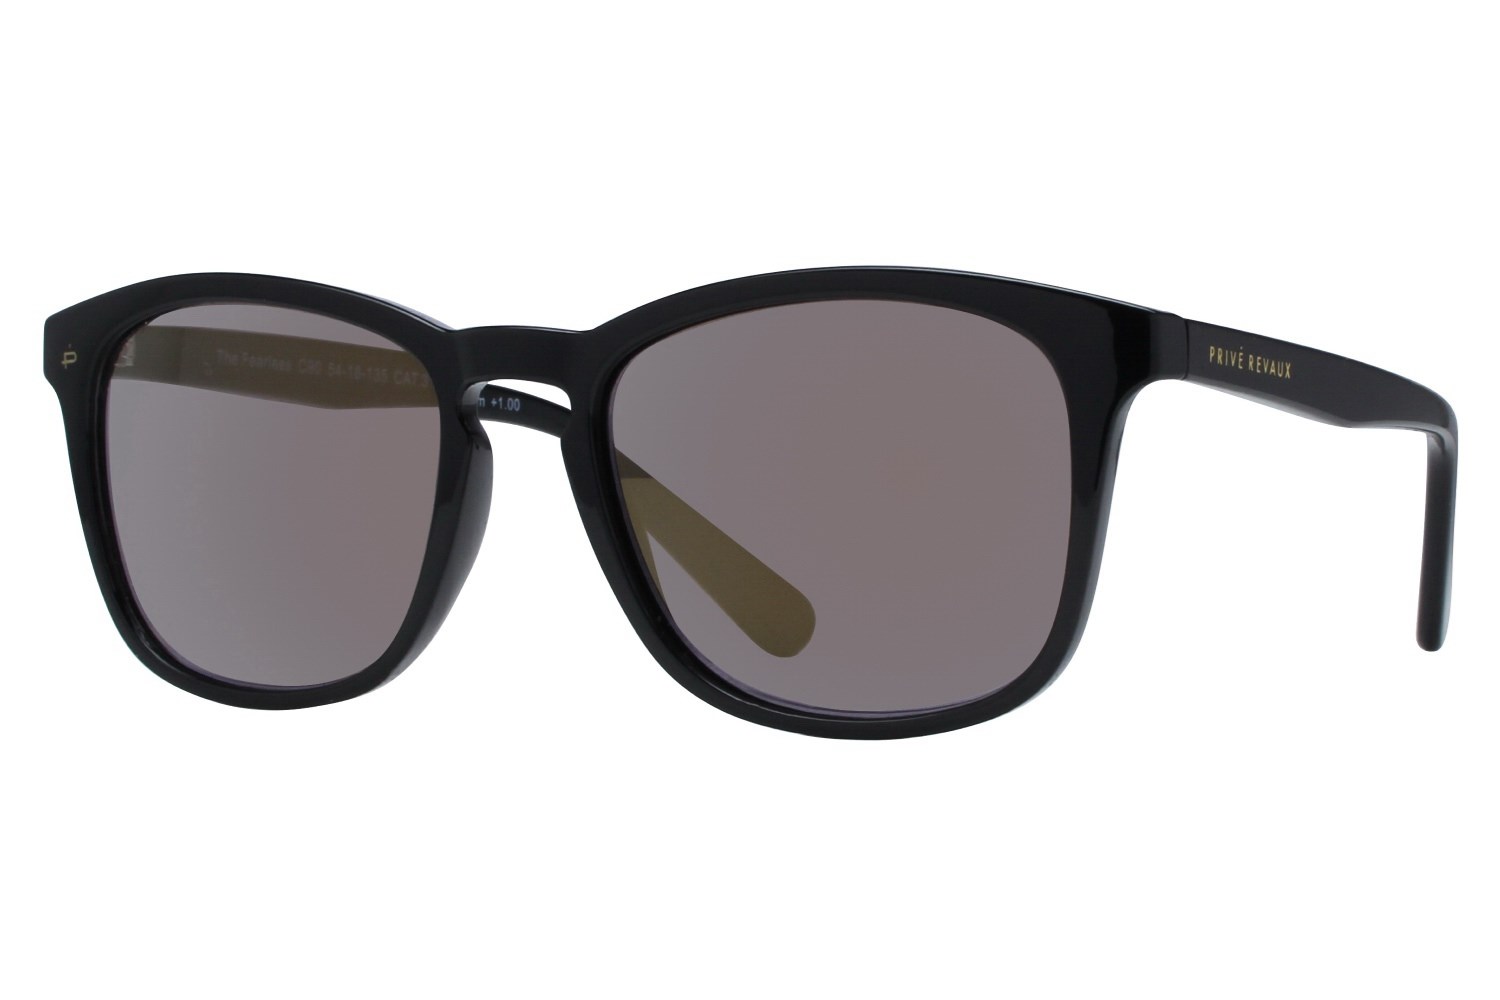 Prive Revaux The Fearless Reading Sunglasses